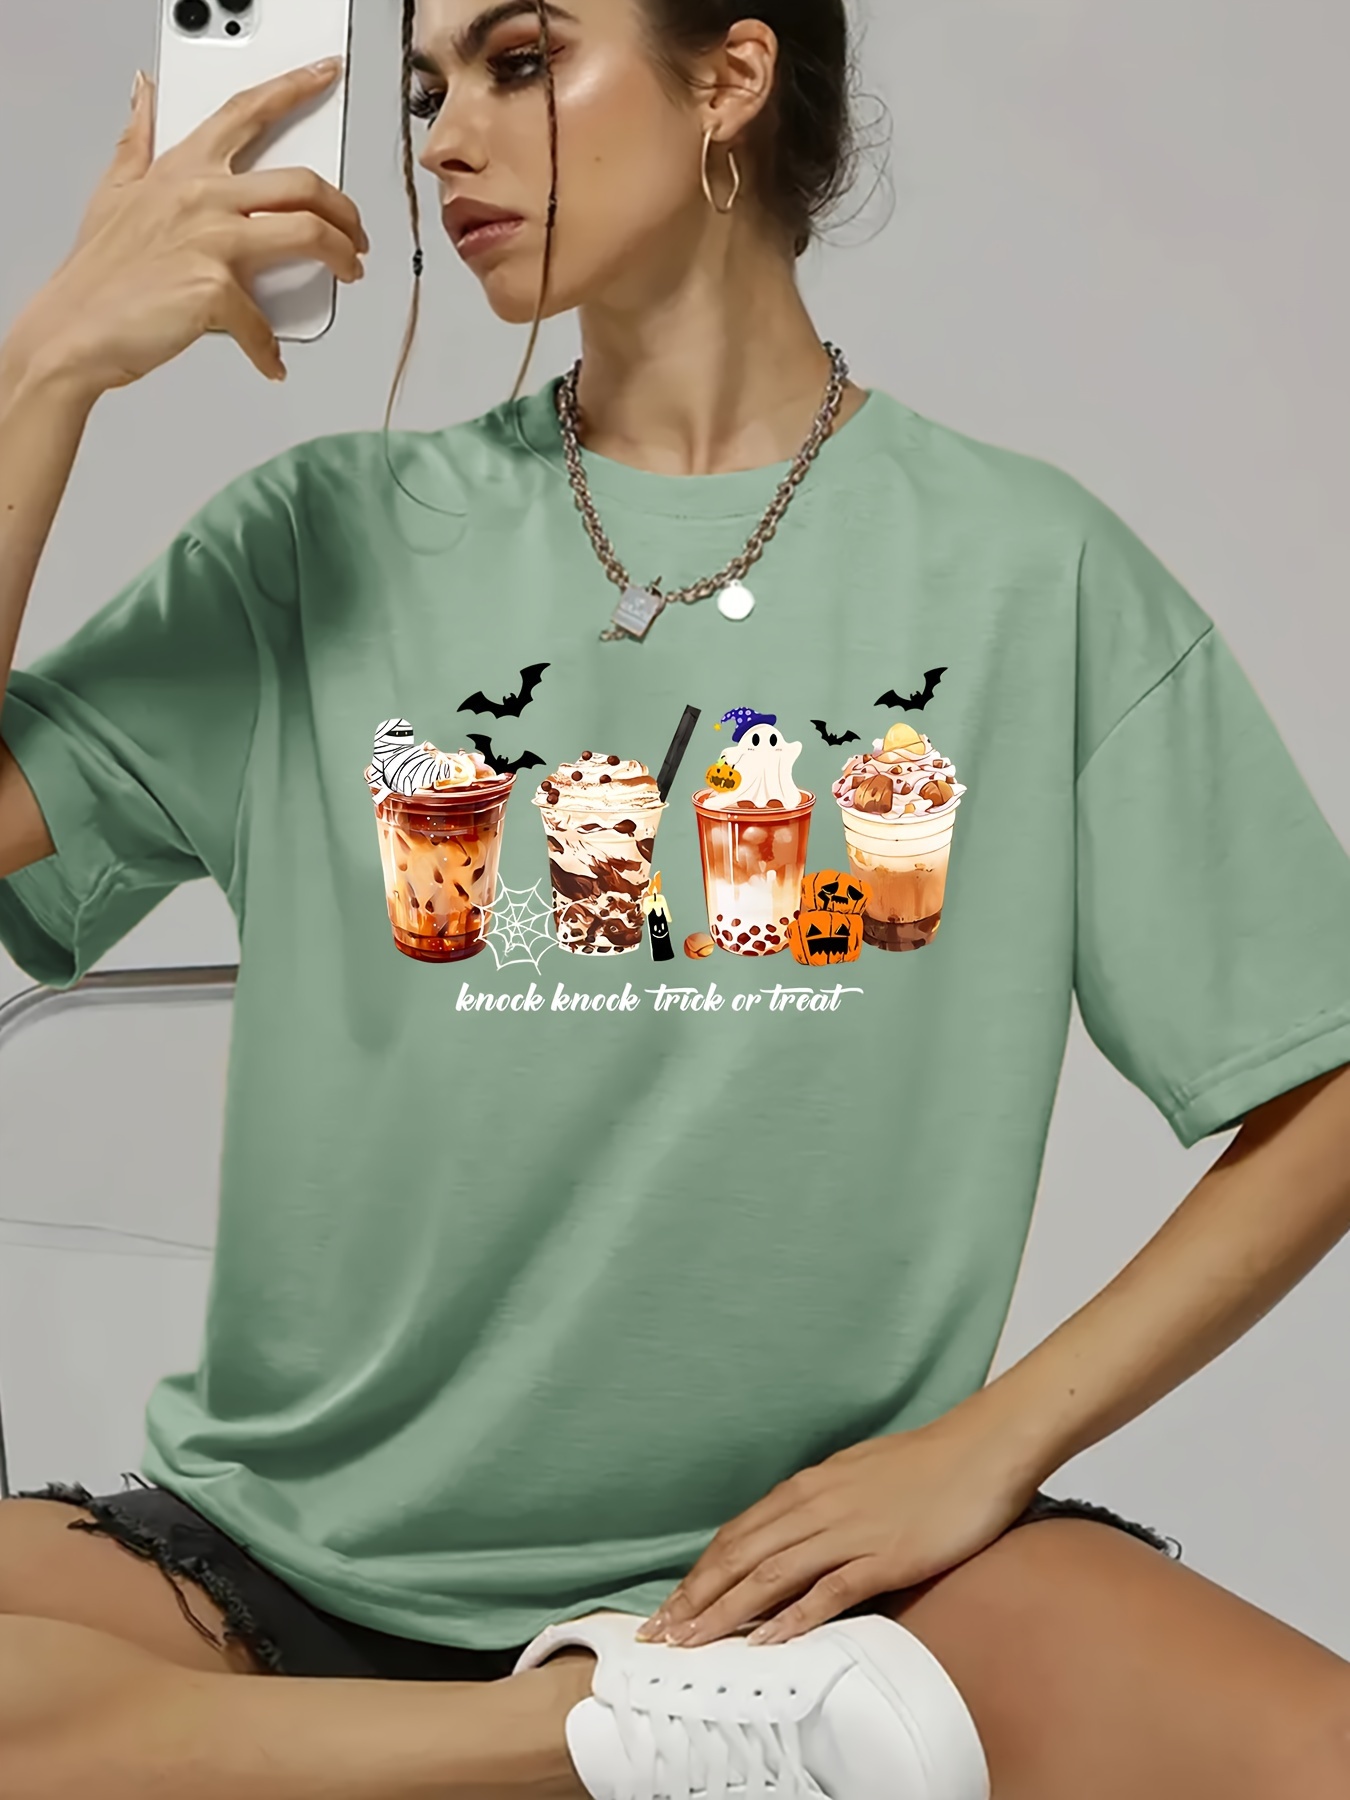 Printed coffee t shirts, Coffee is the best medicine